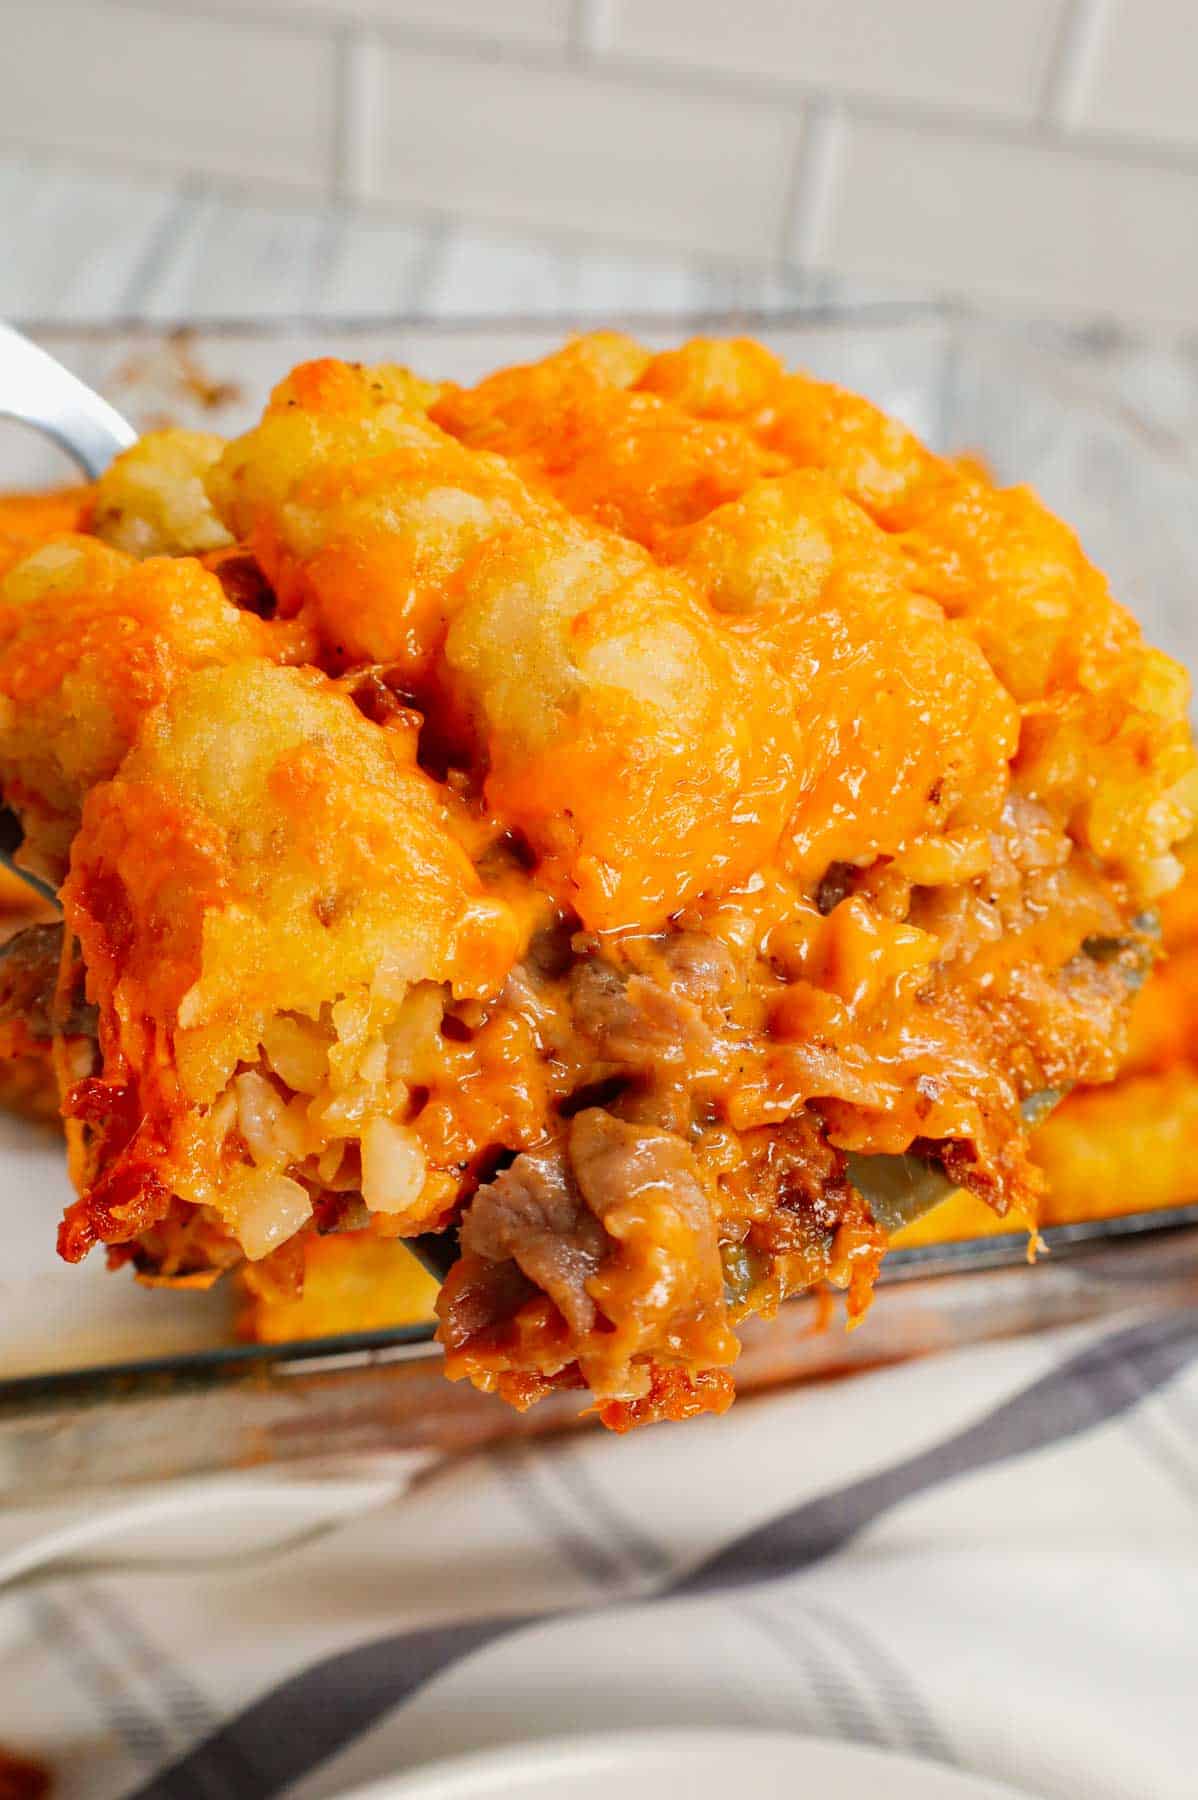 Roast Beef and Cheddar Tater Tot Casserole is a hearty dish loaded with deli roast beef, shredded cheddar cheese, cheddar soup, French's crispy fried onions and tater tots.